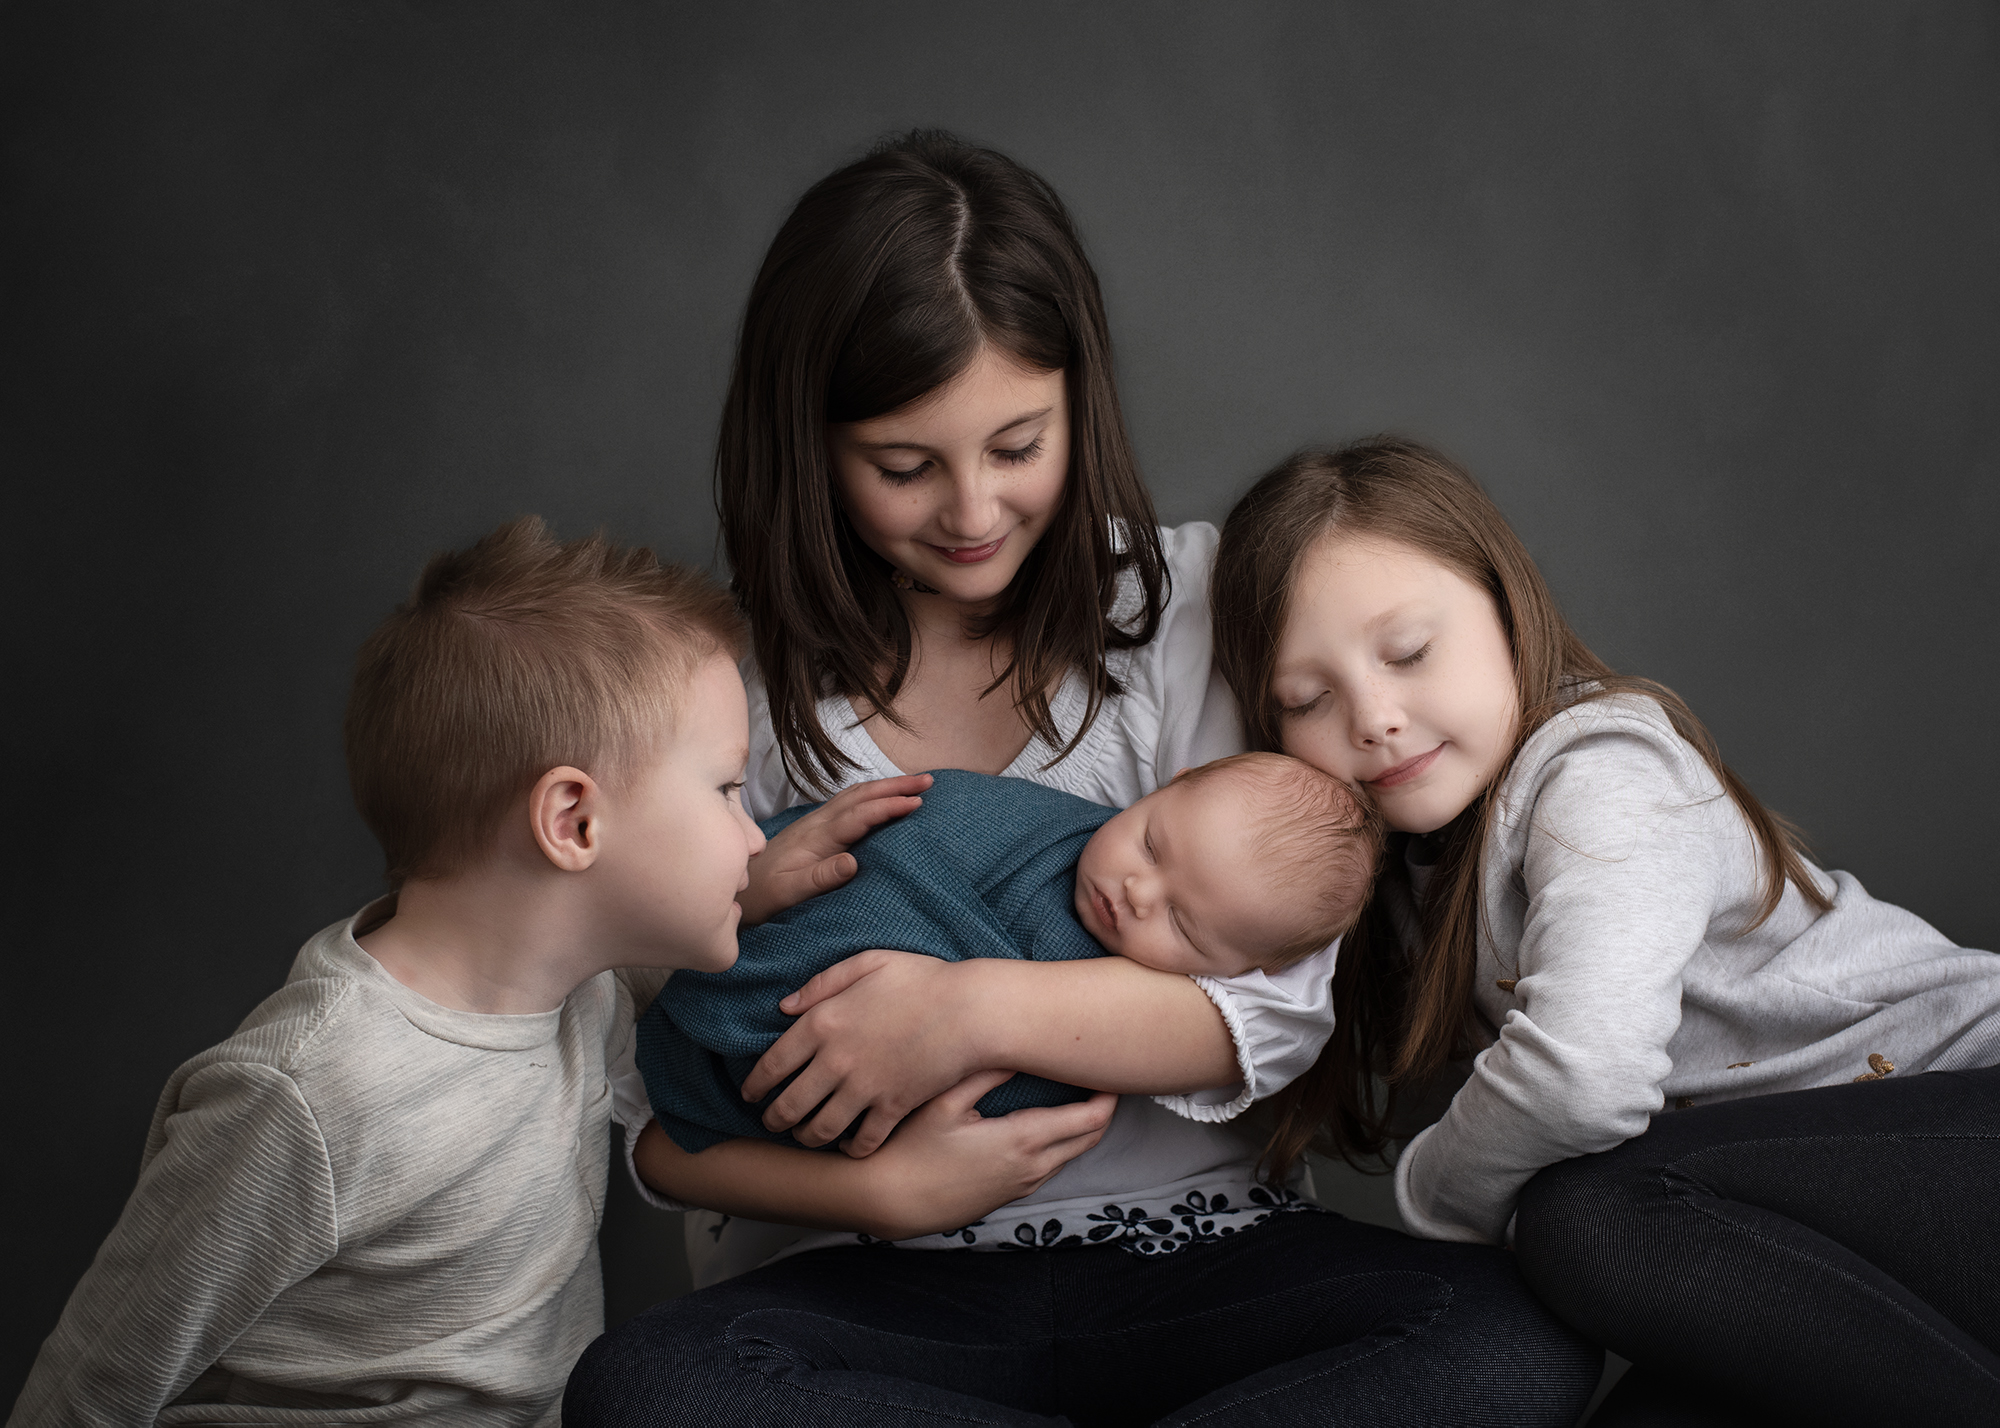 A newborn baby sleeps in the arms of older sister while another sister leans on her shoulder and young brother leans in honeycomb st louis